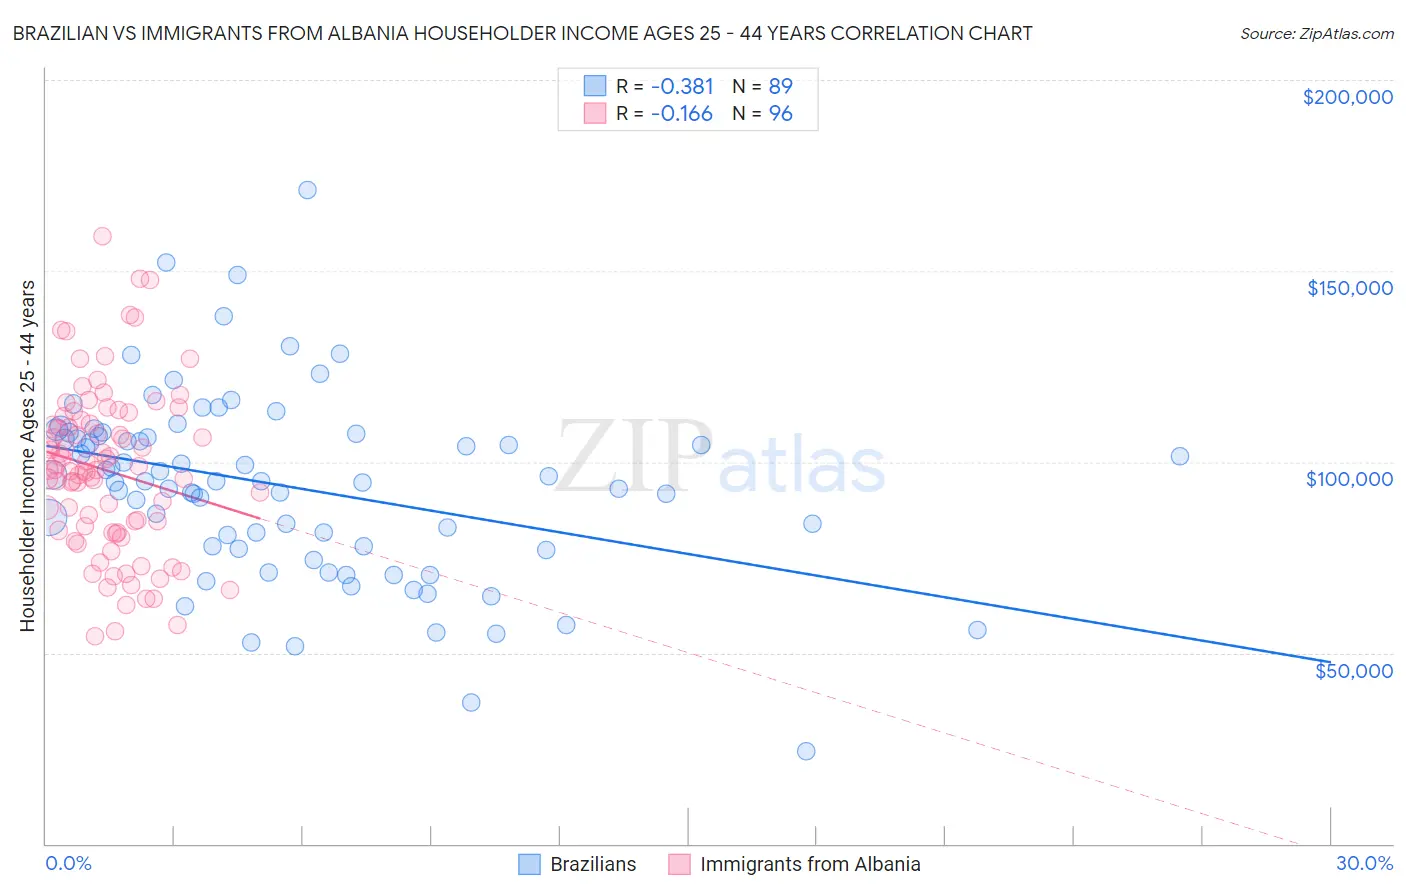 Brazilian vs Immigrants from Albania Householder Income Ages 25 - 44 years